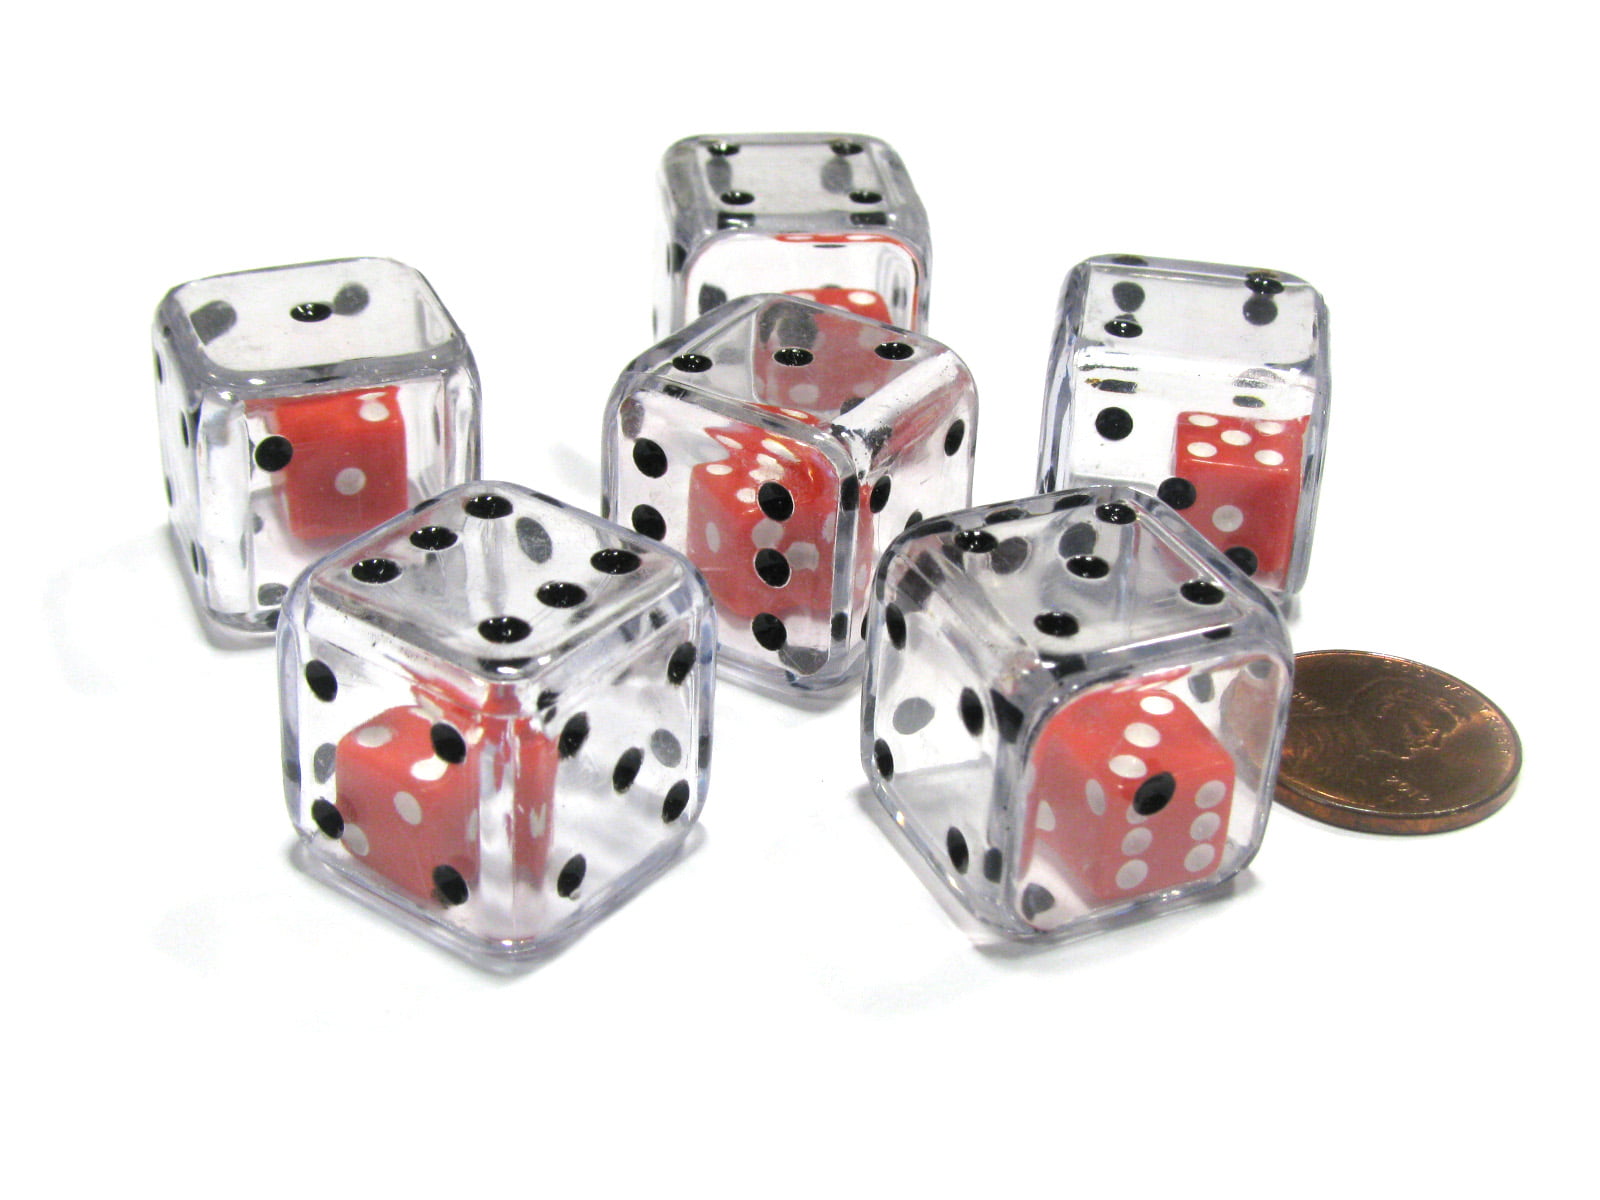 NEW Set of 30 Double Six Sided Dice 6 Colors D6 Game RPG Math 19mm Koplow 